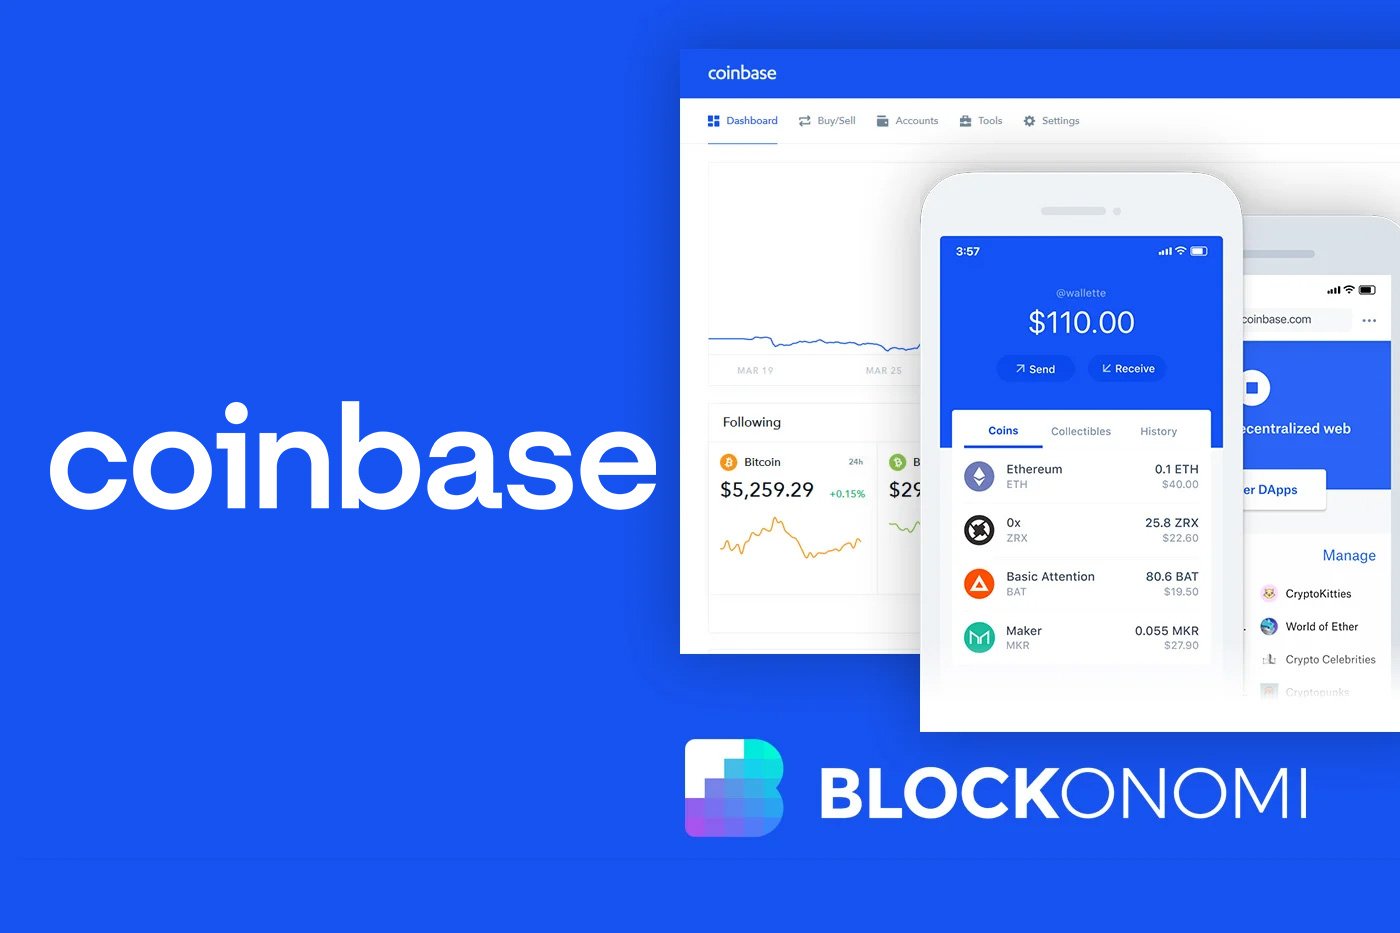 Coinbase Help Desk - coinbase add payment method not working